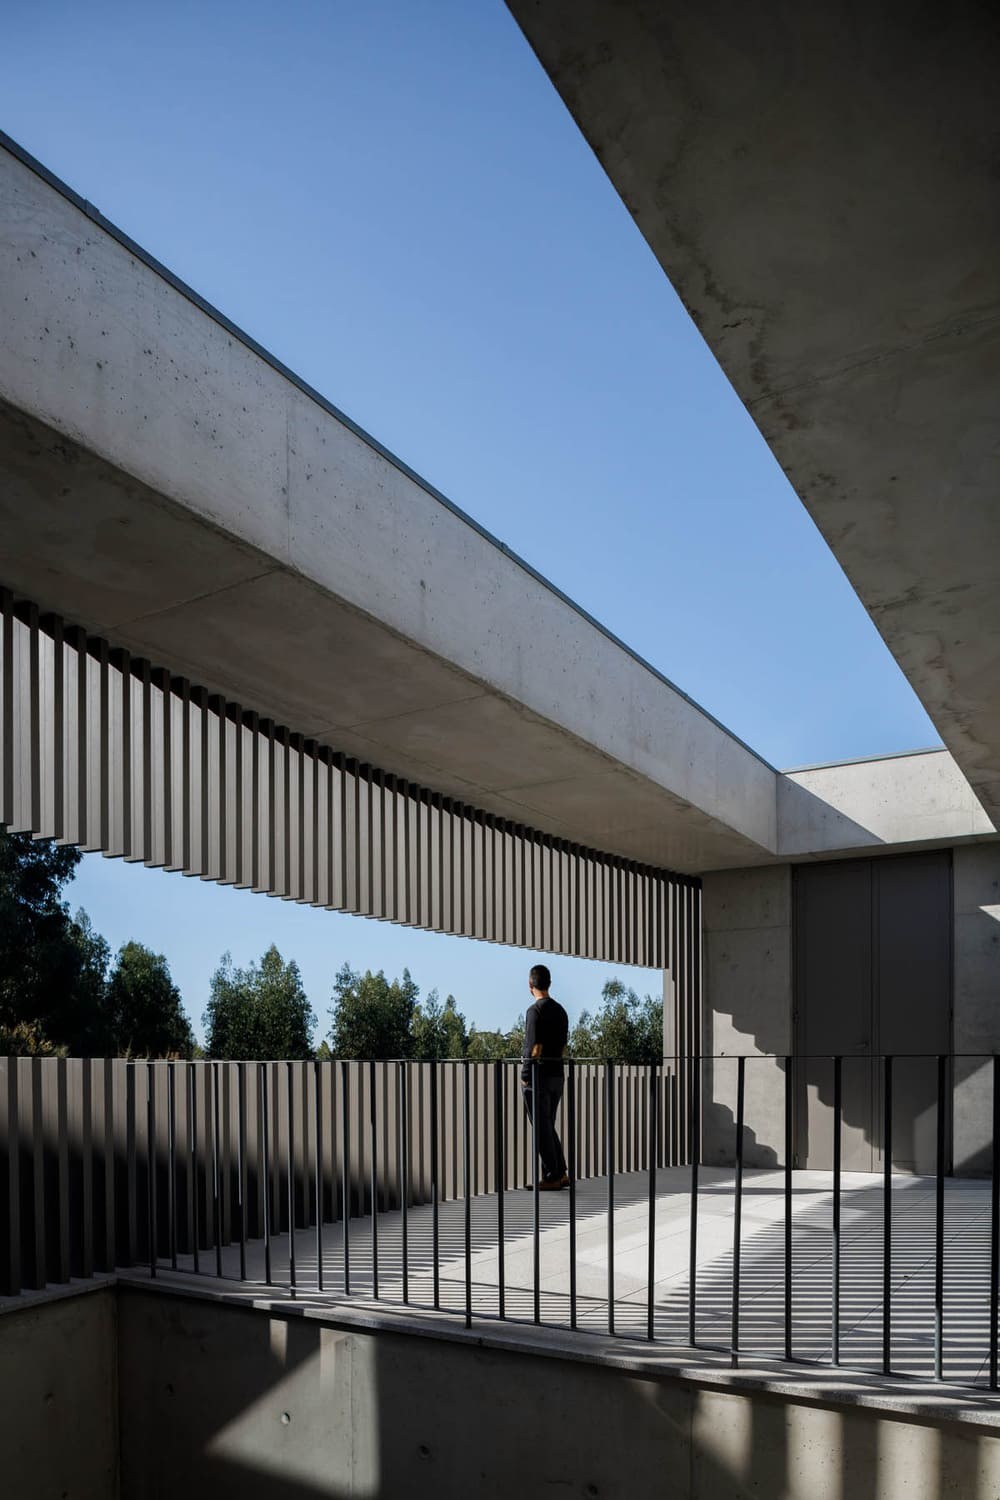 Steelform Factory - The Concrete Defines the Industrial Building